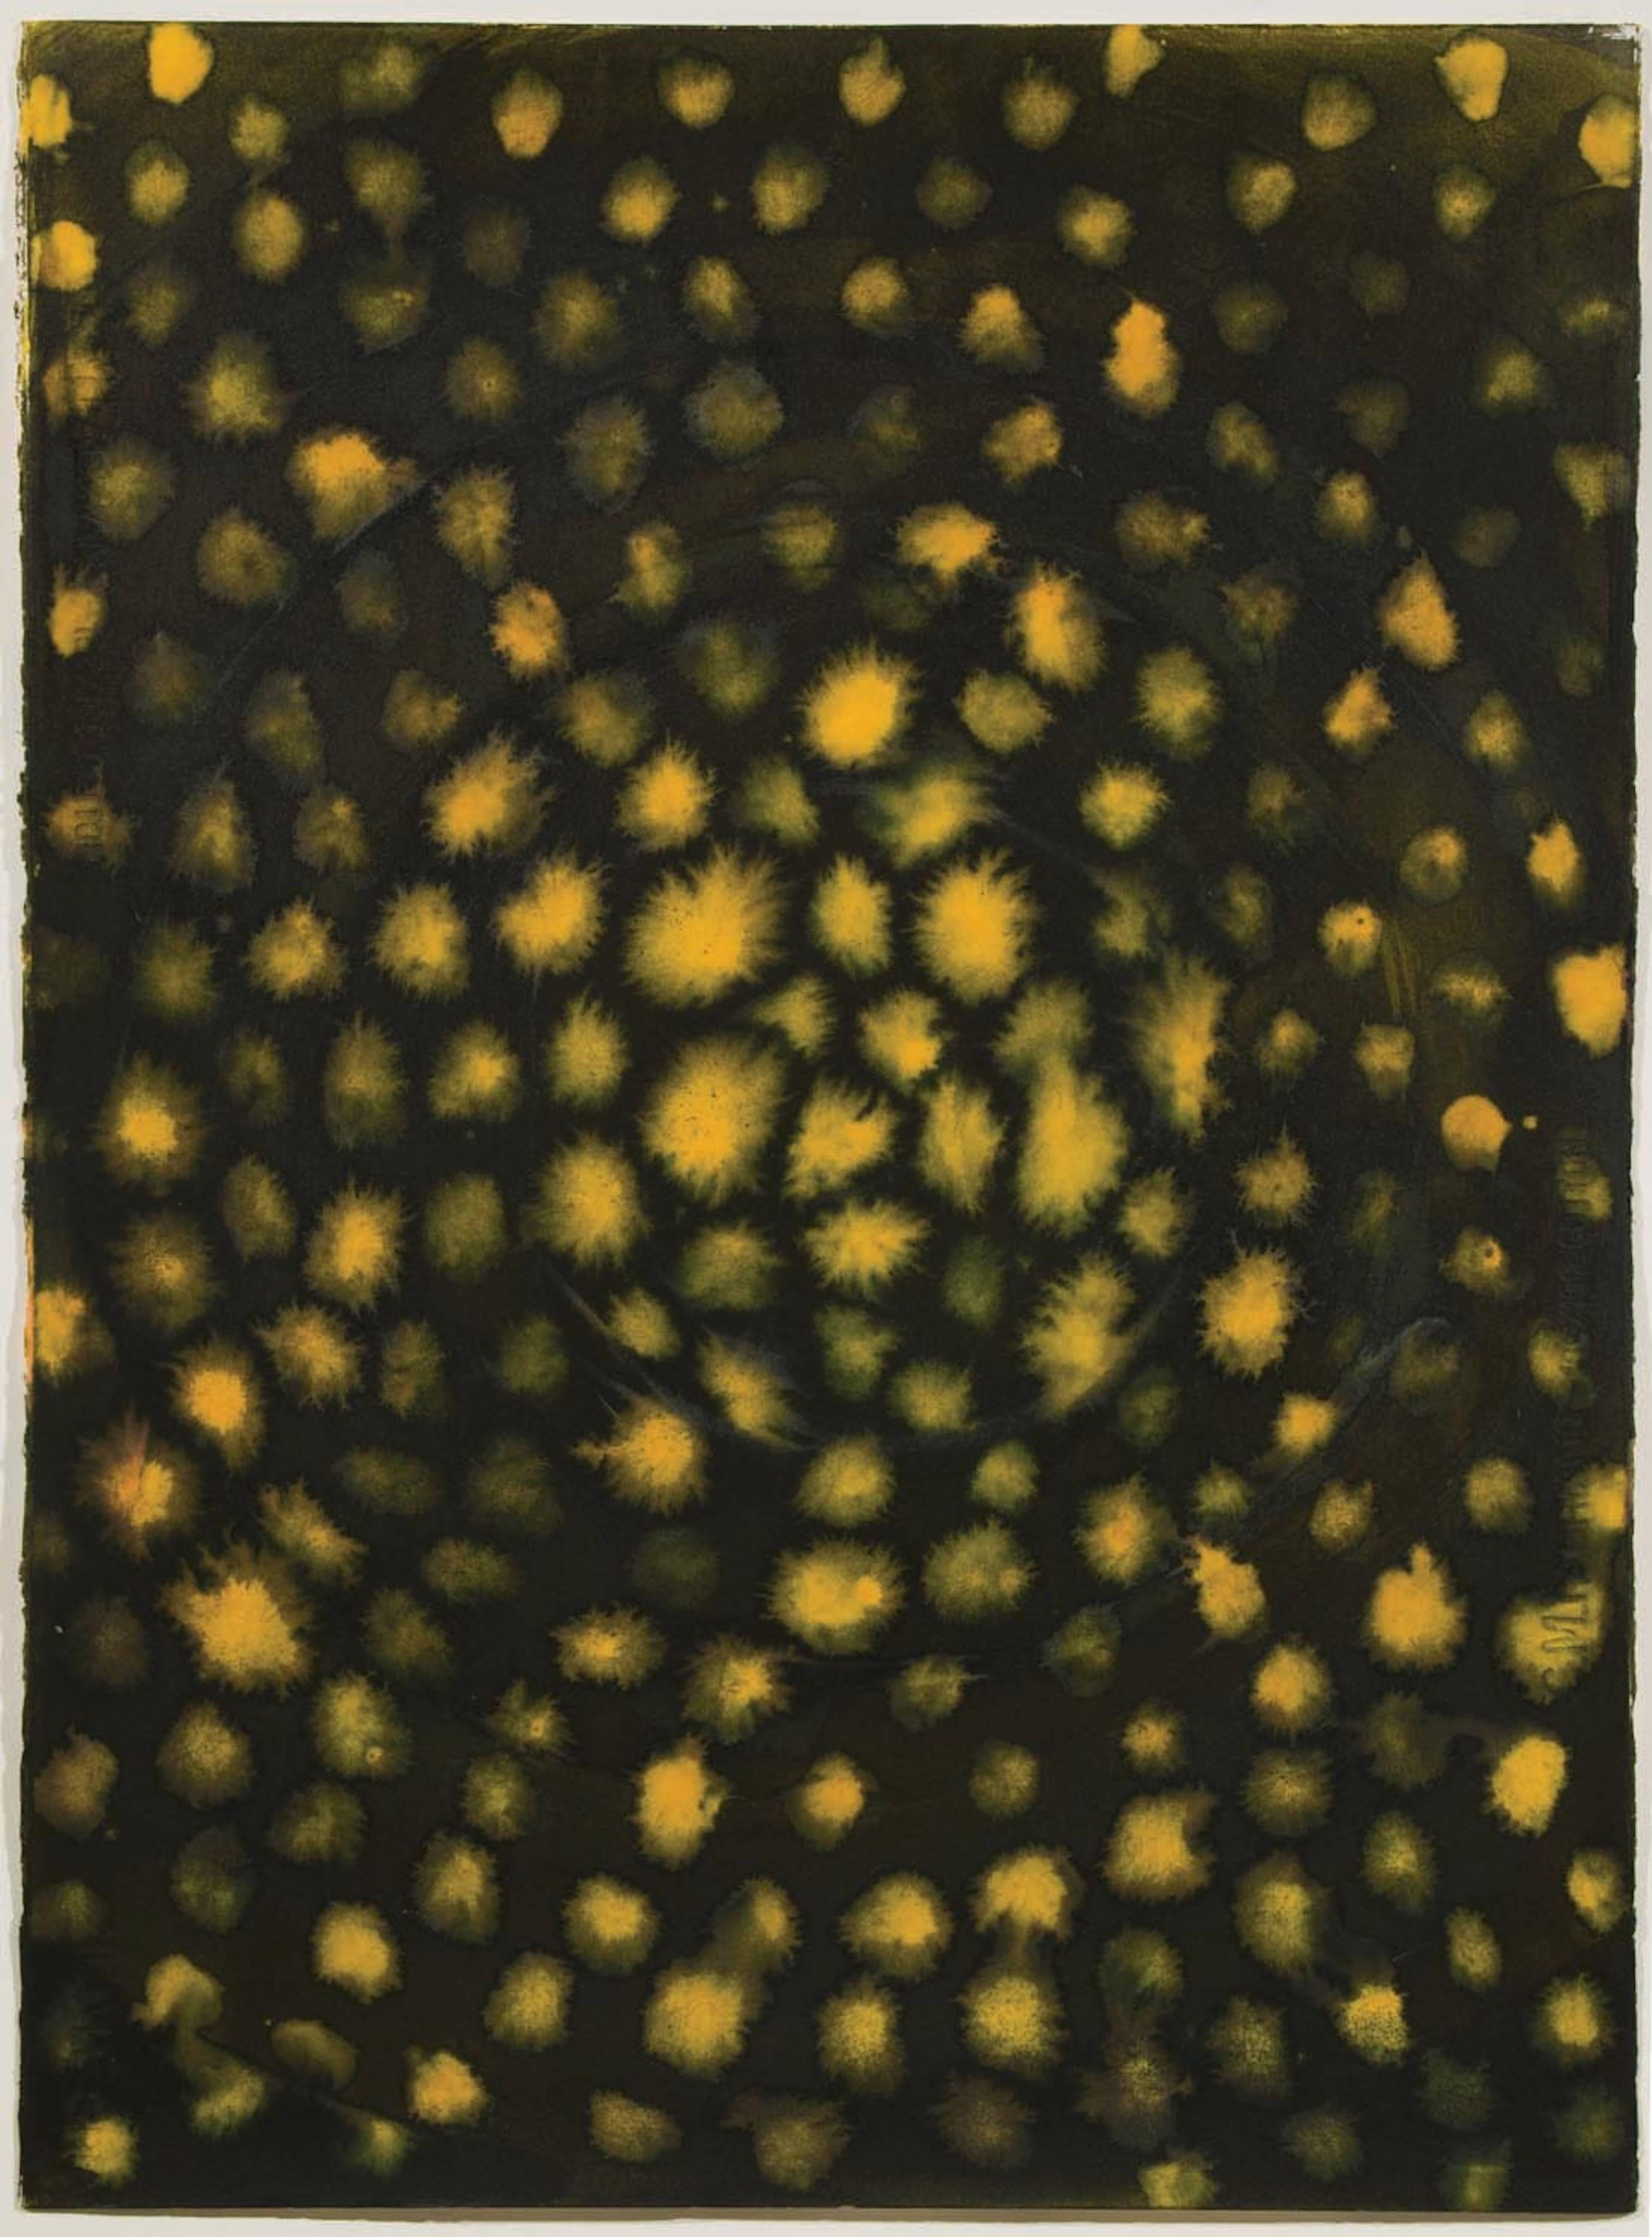 Ross Bleckner Abstract Drawing - Untitled, 1989